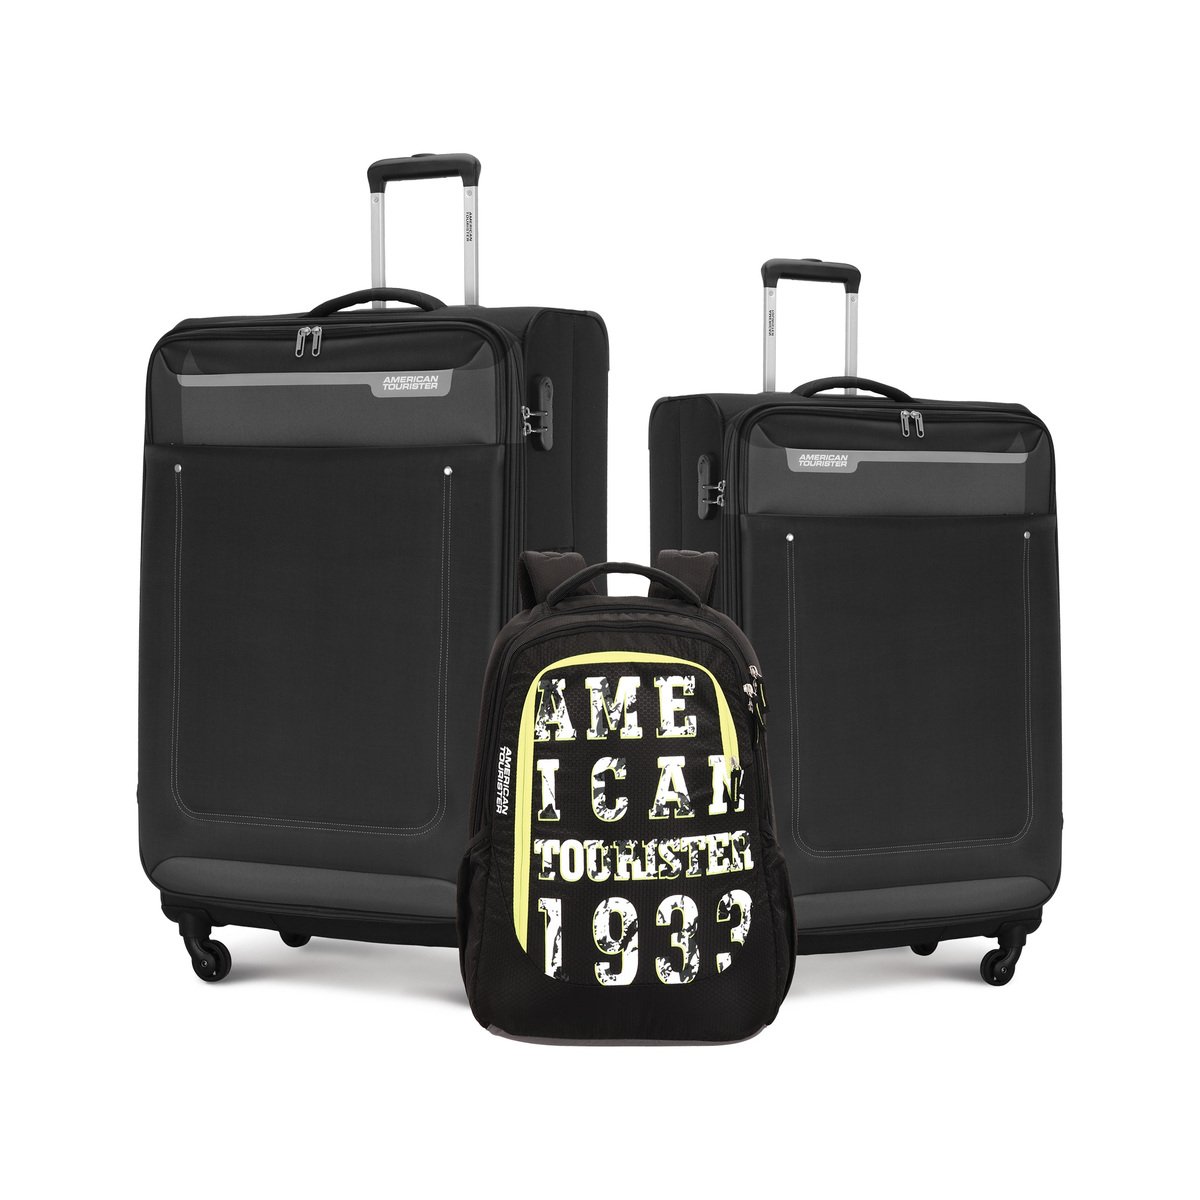 American Tourister Jackson 4 Wheel Soft Trolley Set with Backpack, 2 pcs, 70+80 cm, Black